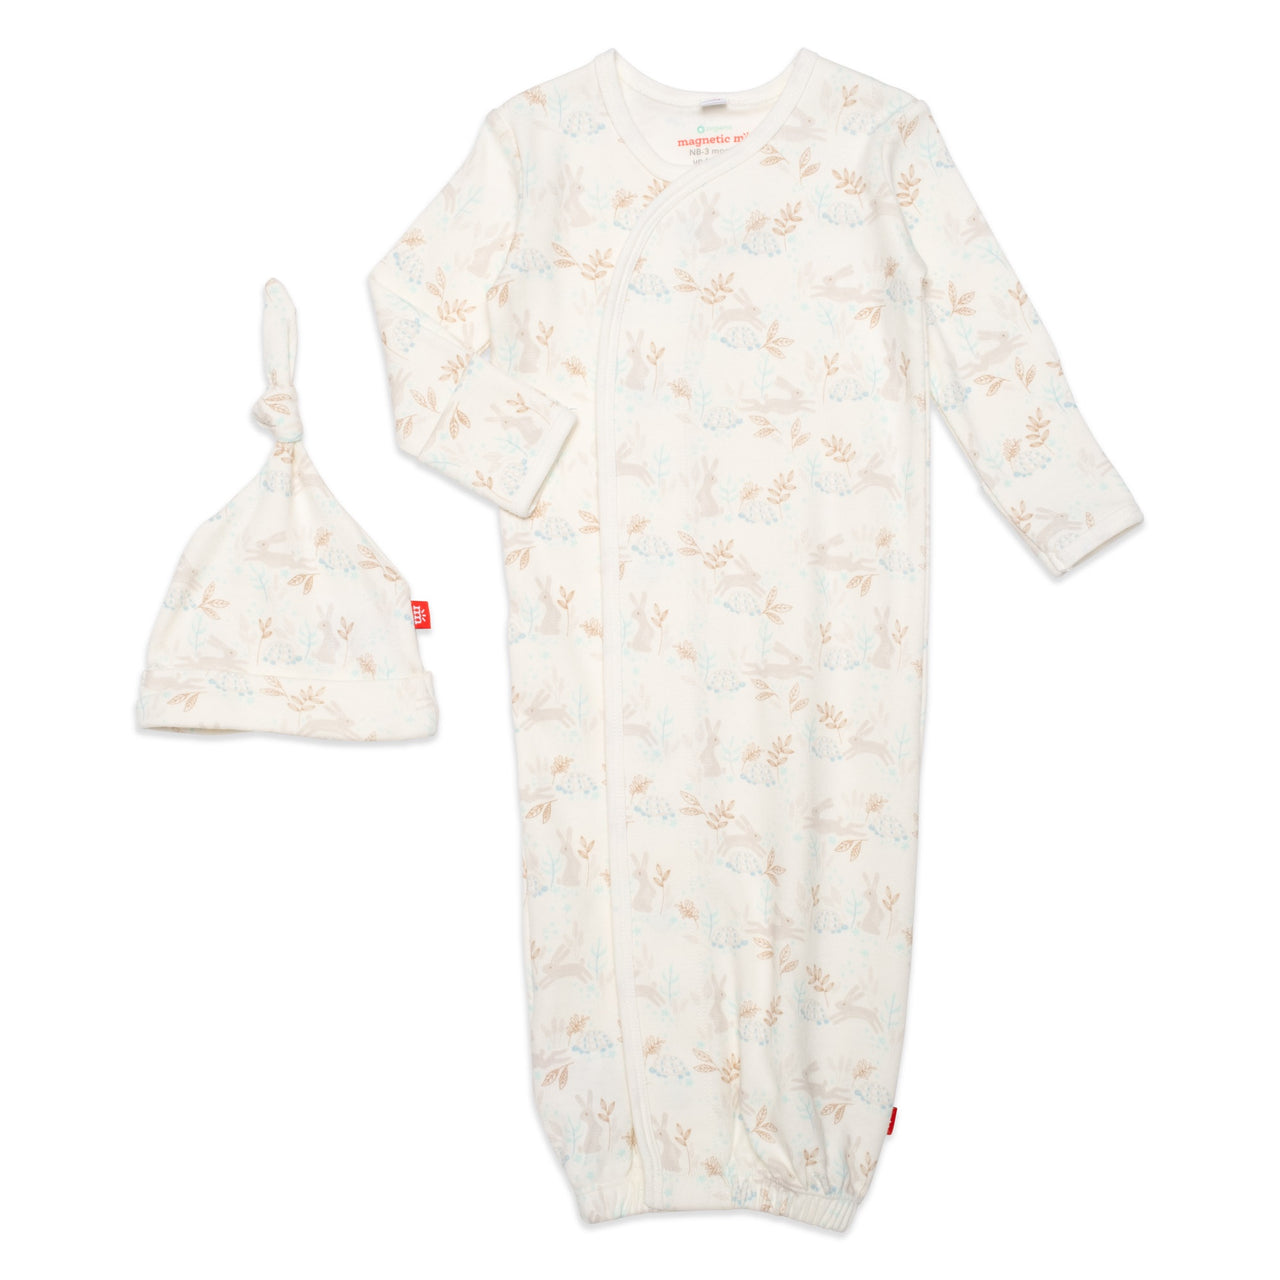 MAgnetic Me Tortoise and Hare Organic Magnetic Gown W/Hat NB/3m MS14OG02Th 5101